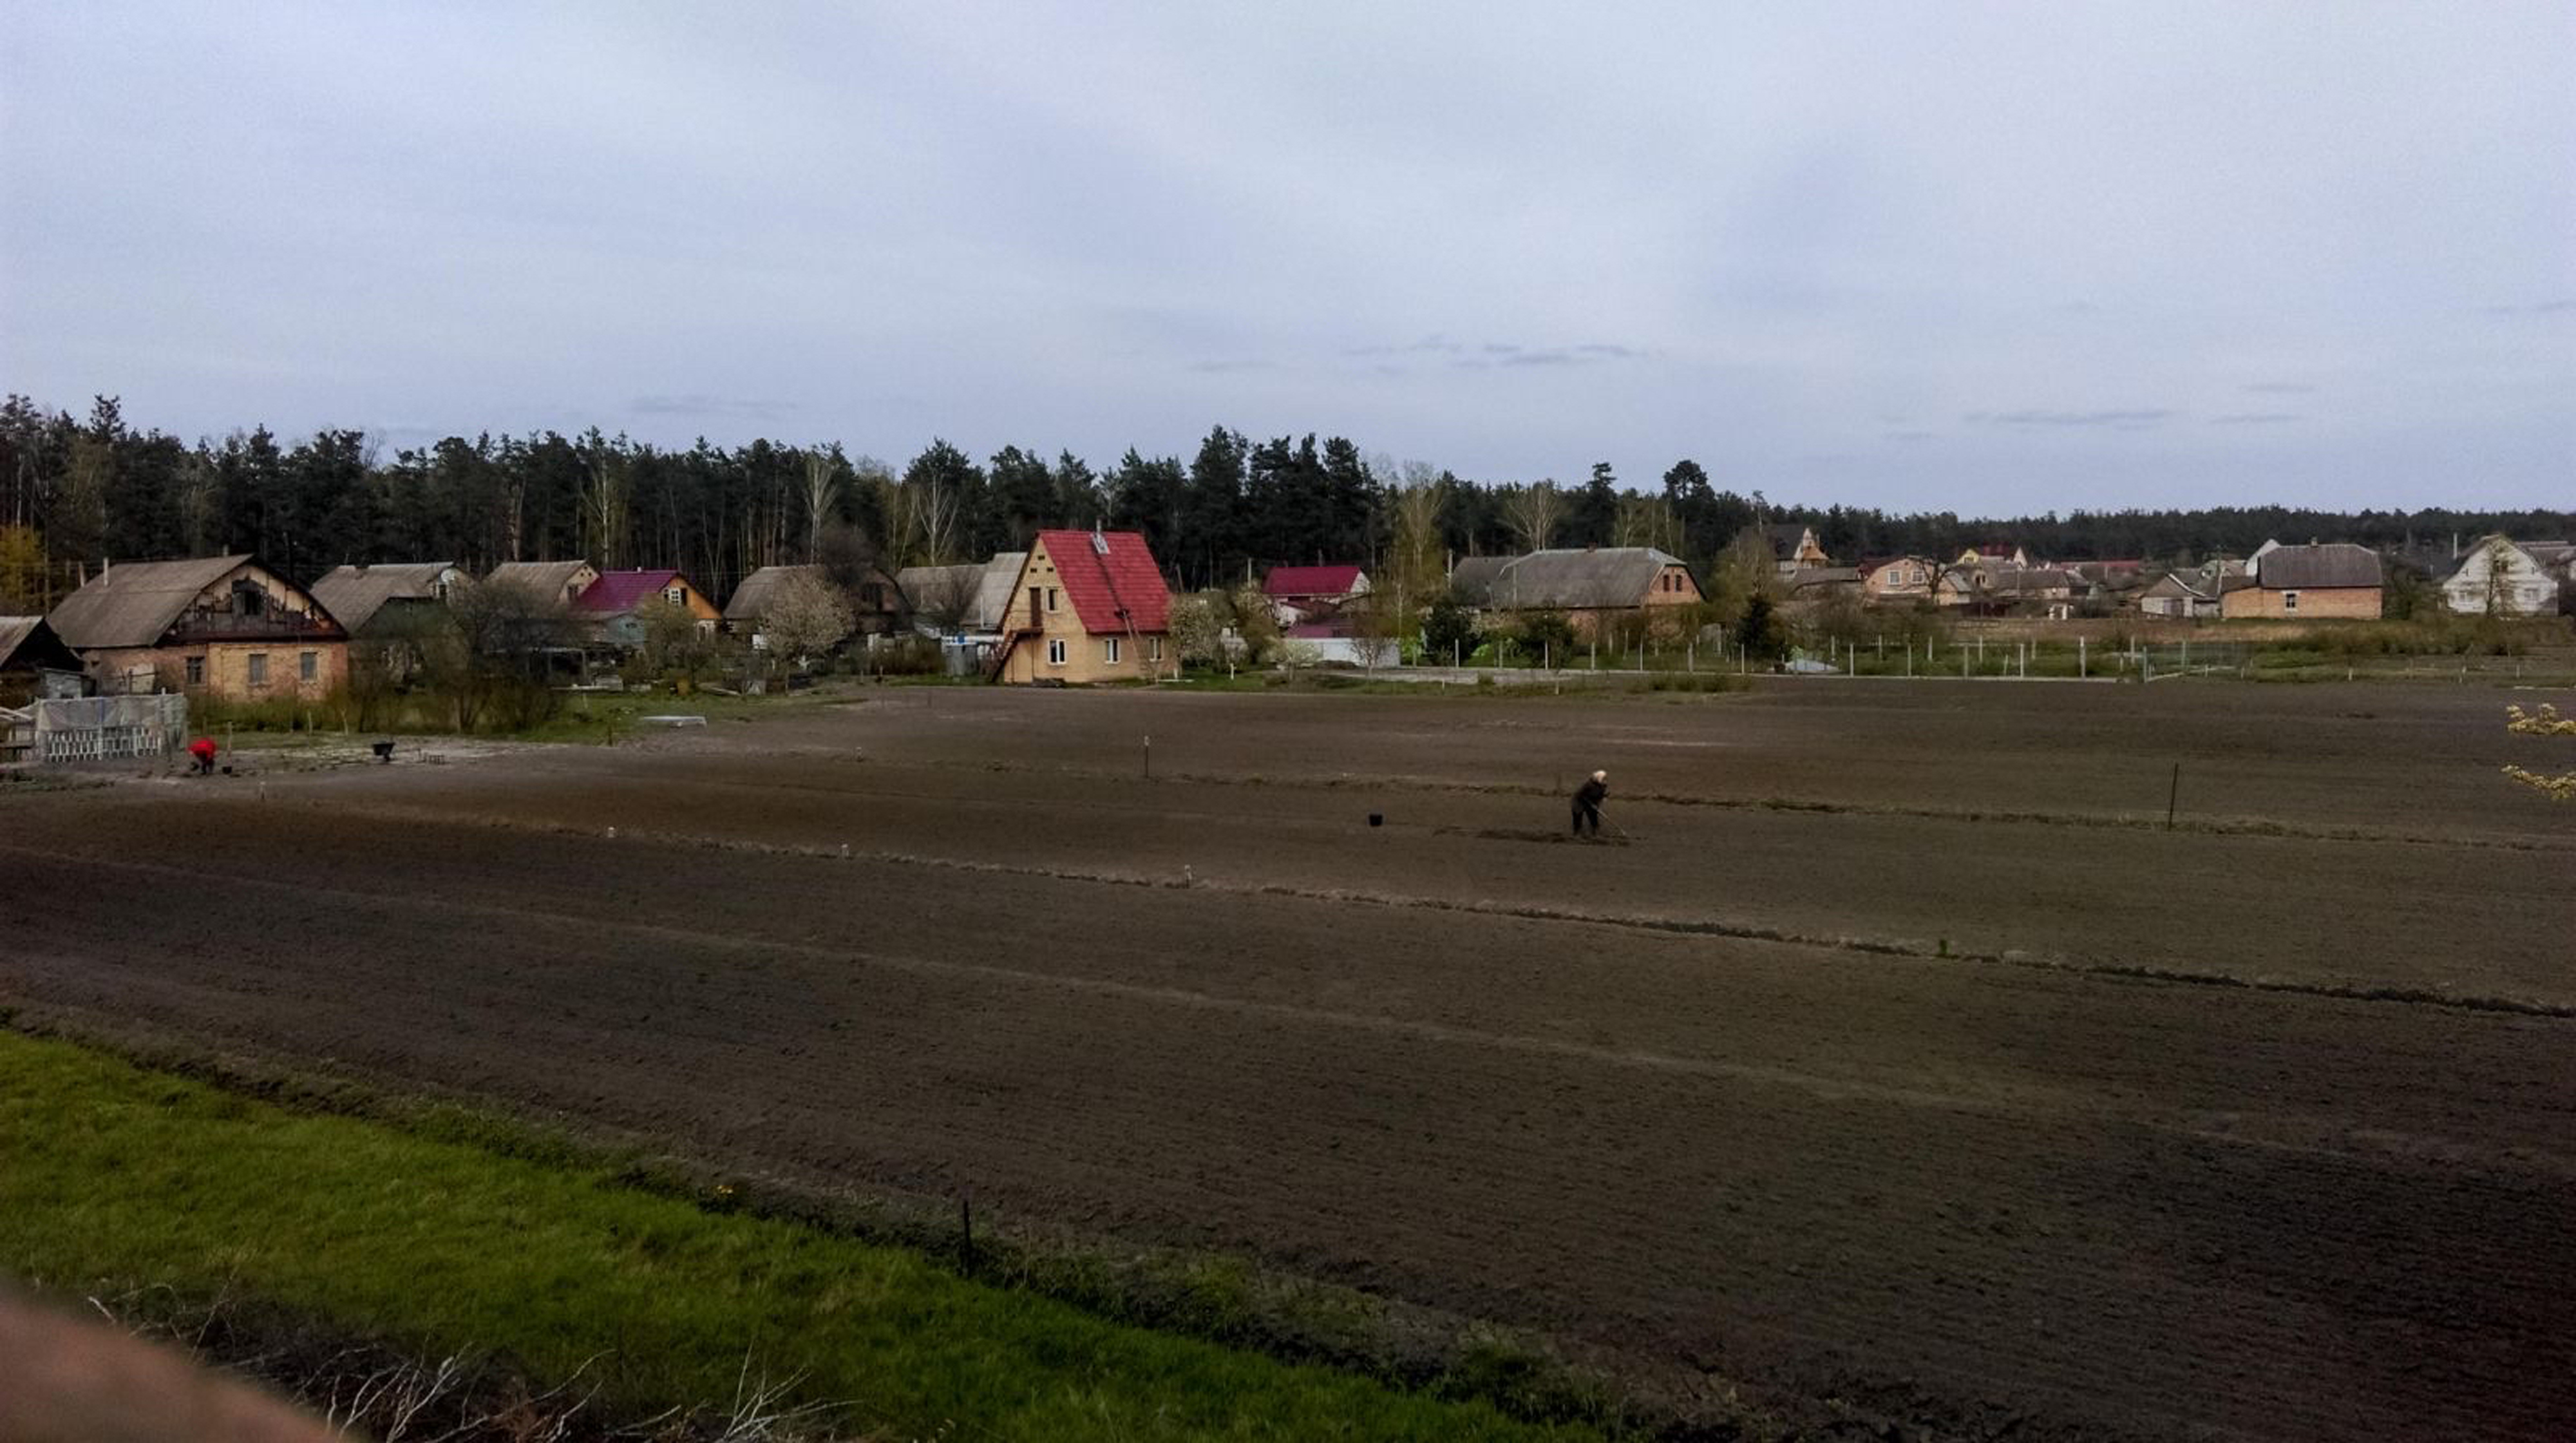 A bare field with houses in the background